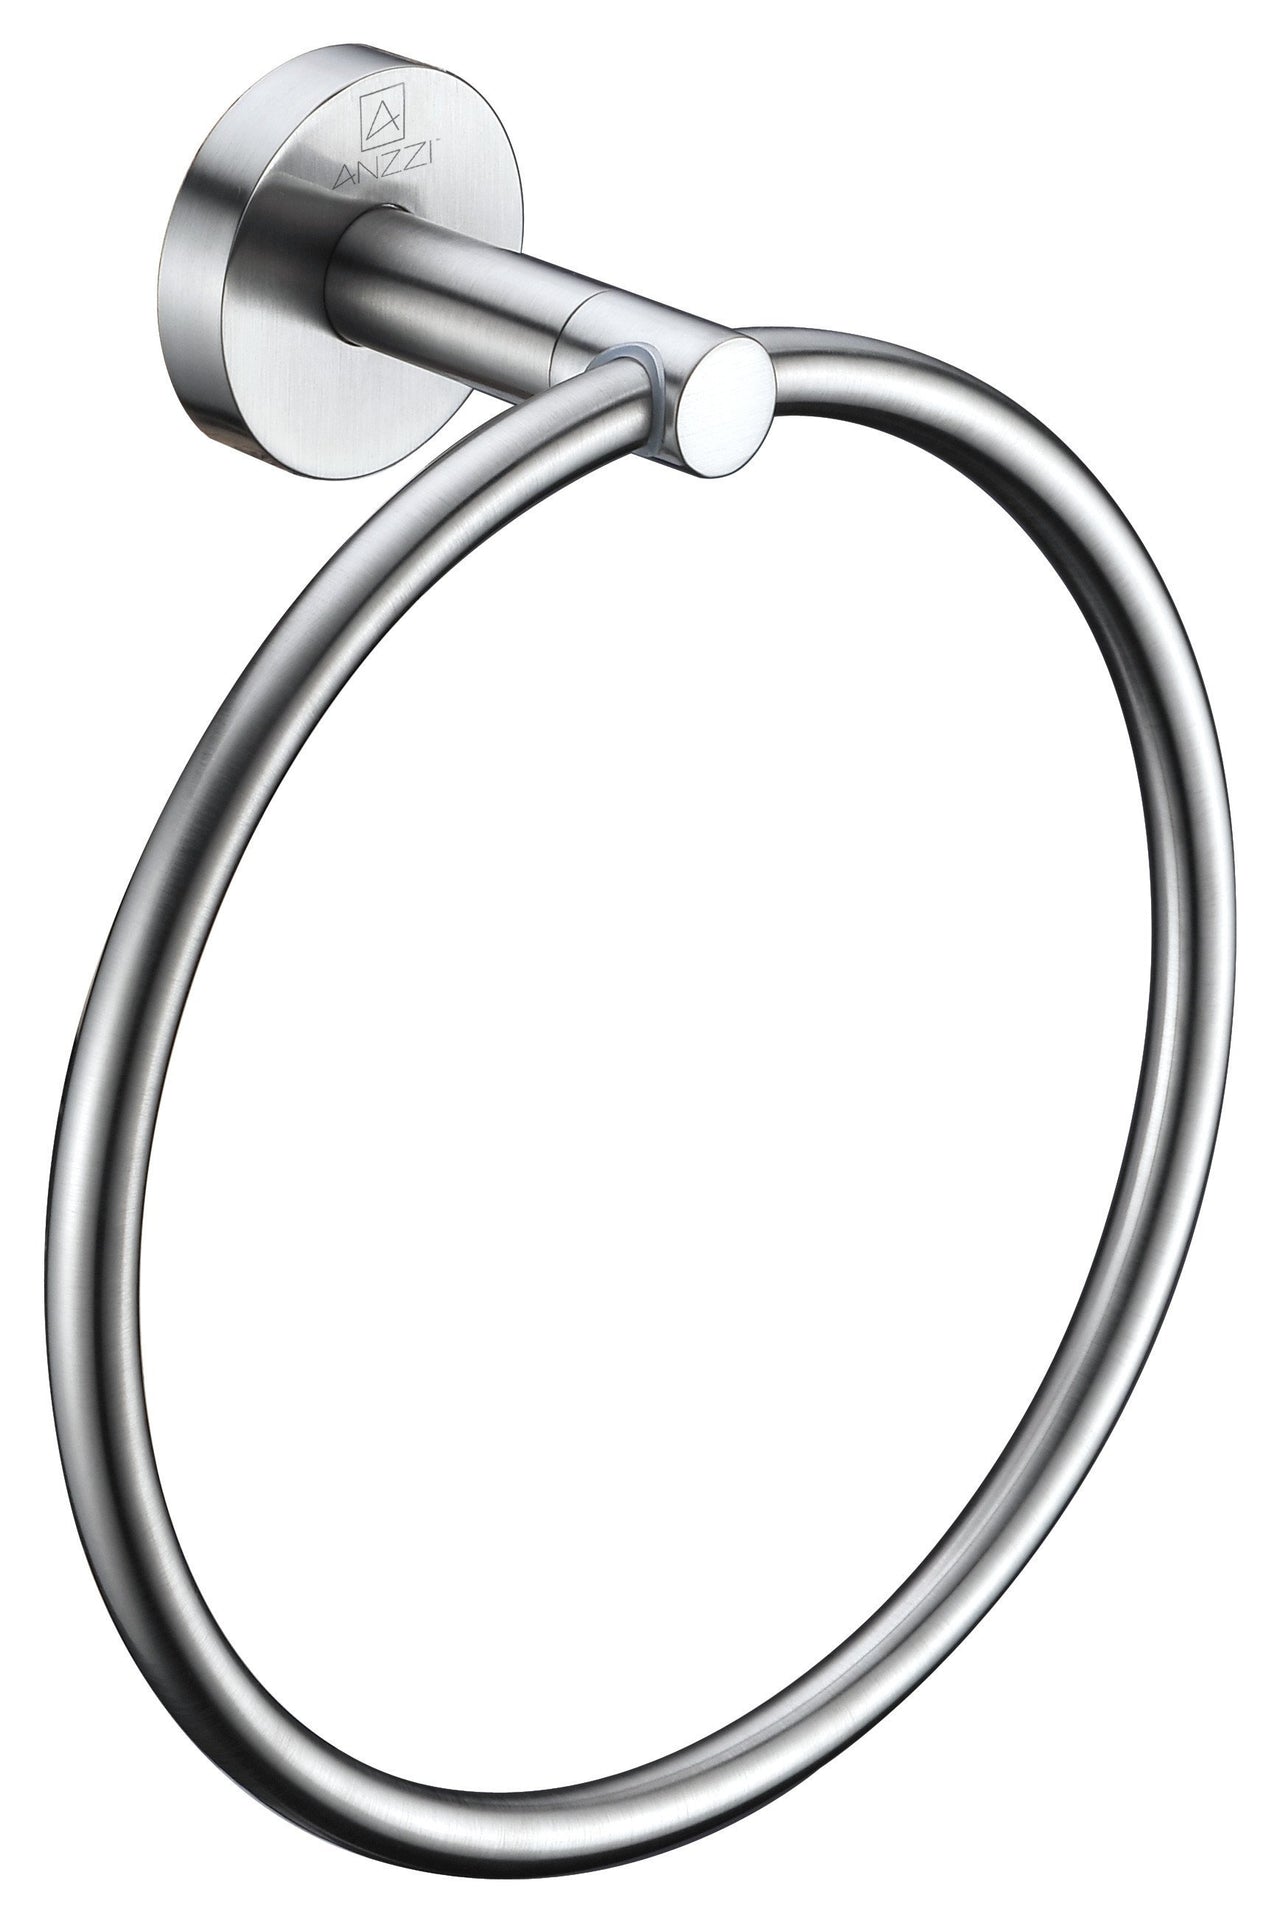 ANZZI Caster Series Towel Ring in Brushed Nickel Towel Ring ANZZI 